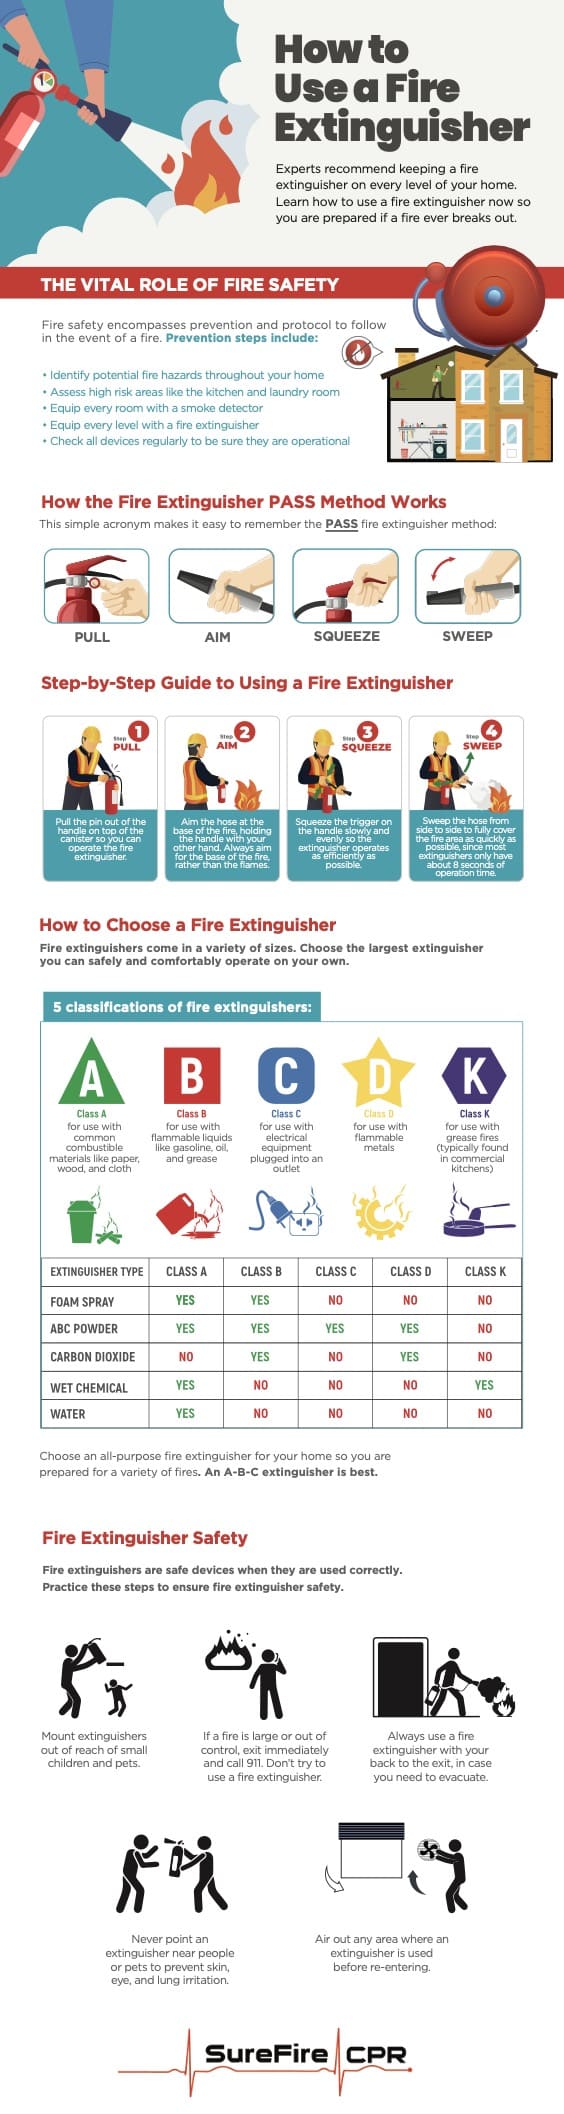 Thumbnail image of the infographic: How to Use a Fire Extinguisher